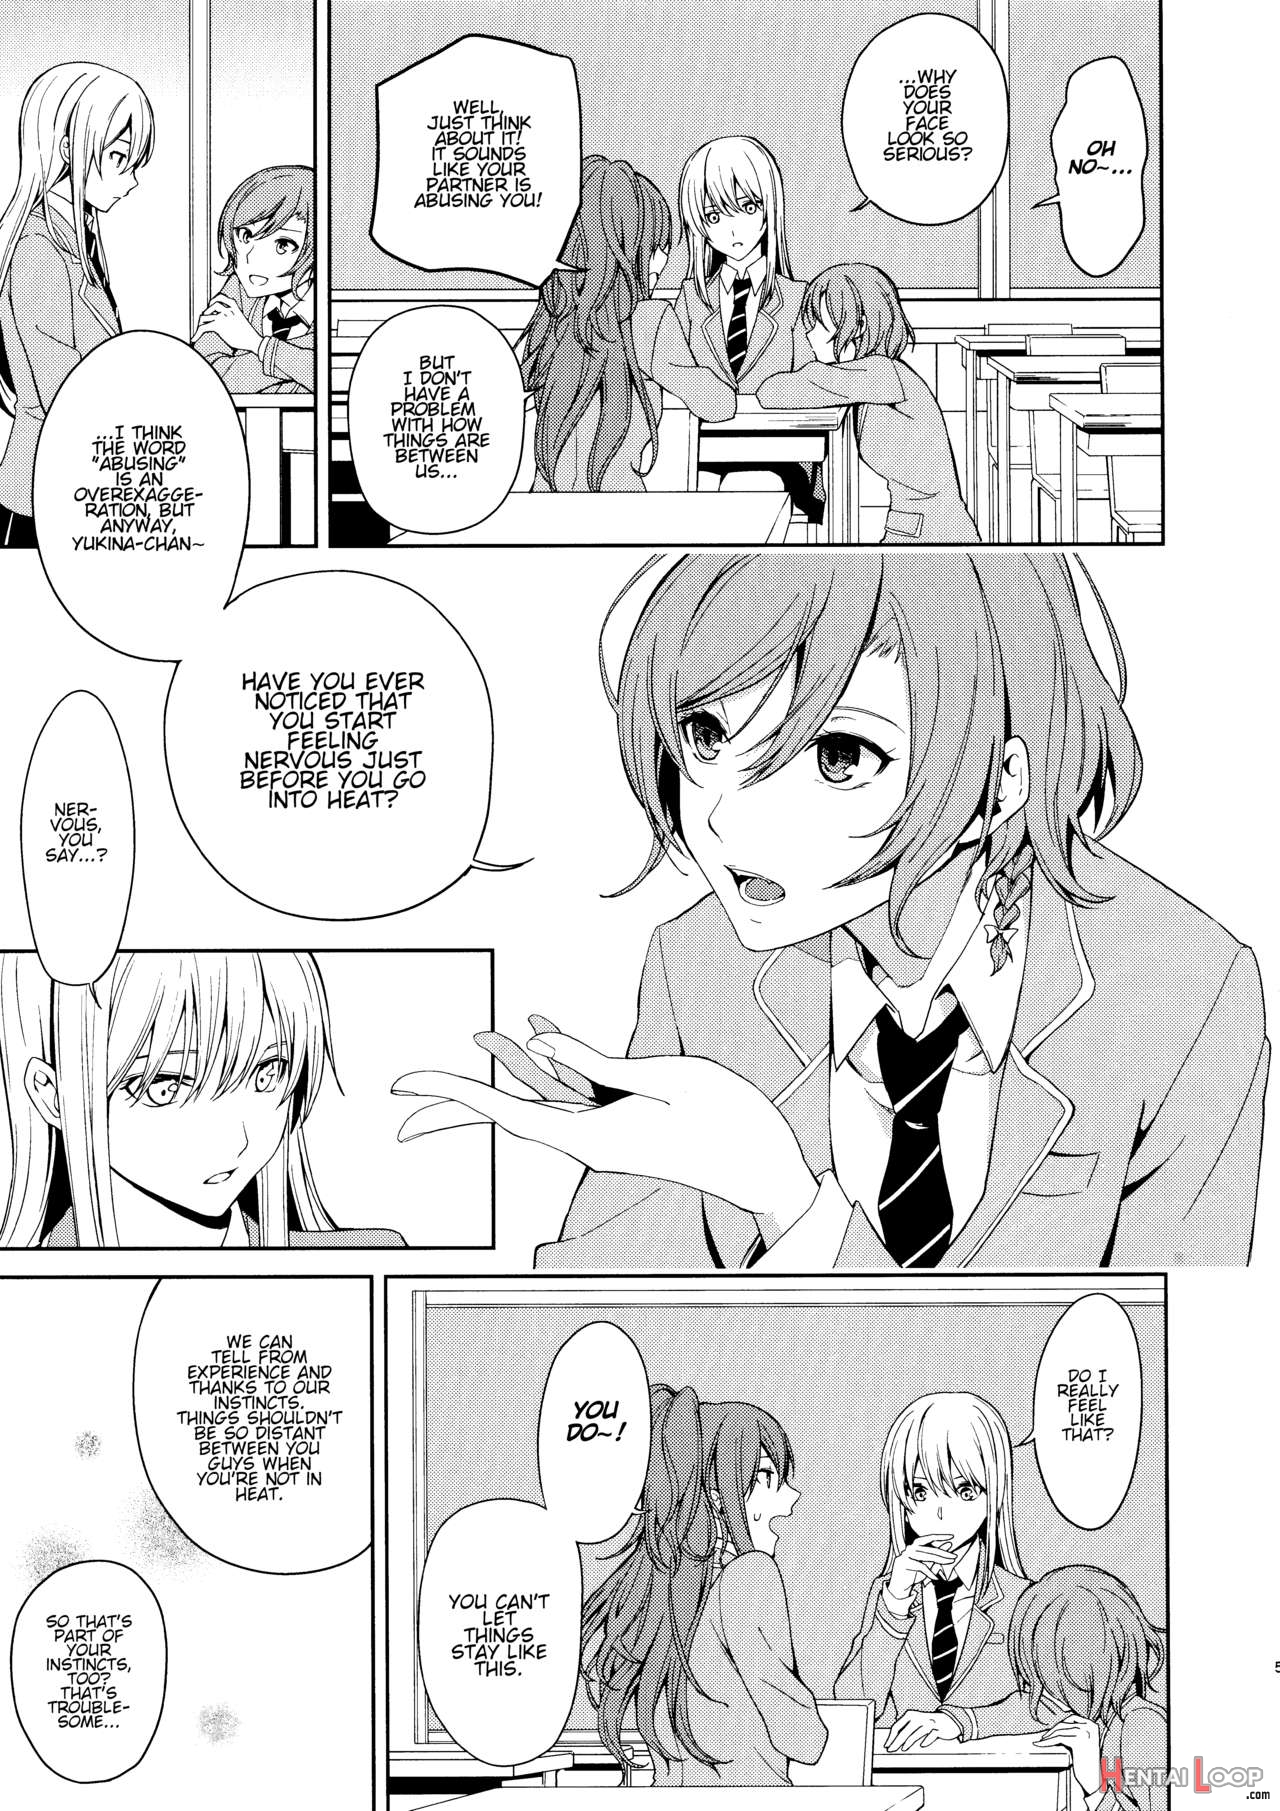 Honnou No Seishikata - How To Control Your Instincts page 4